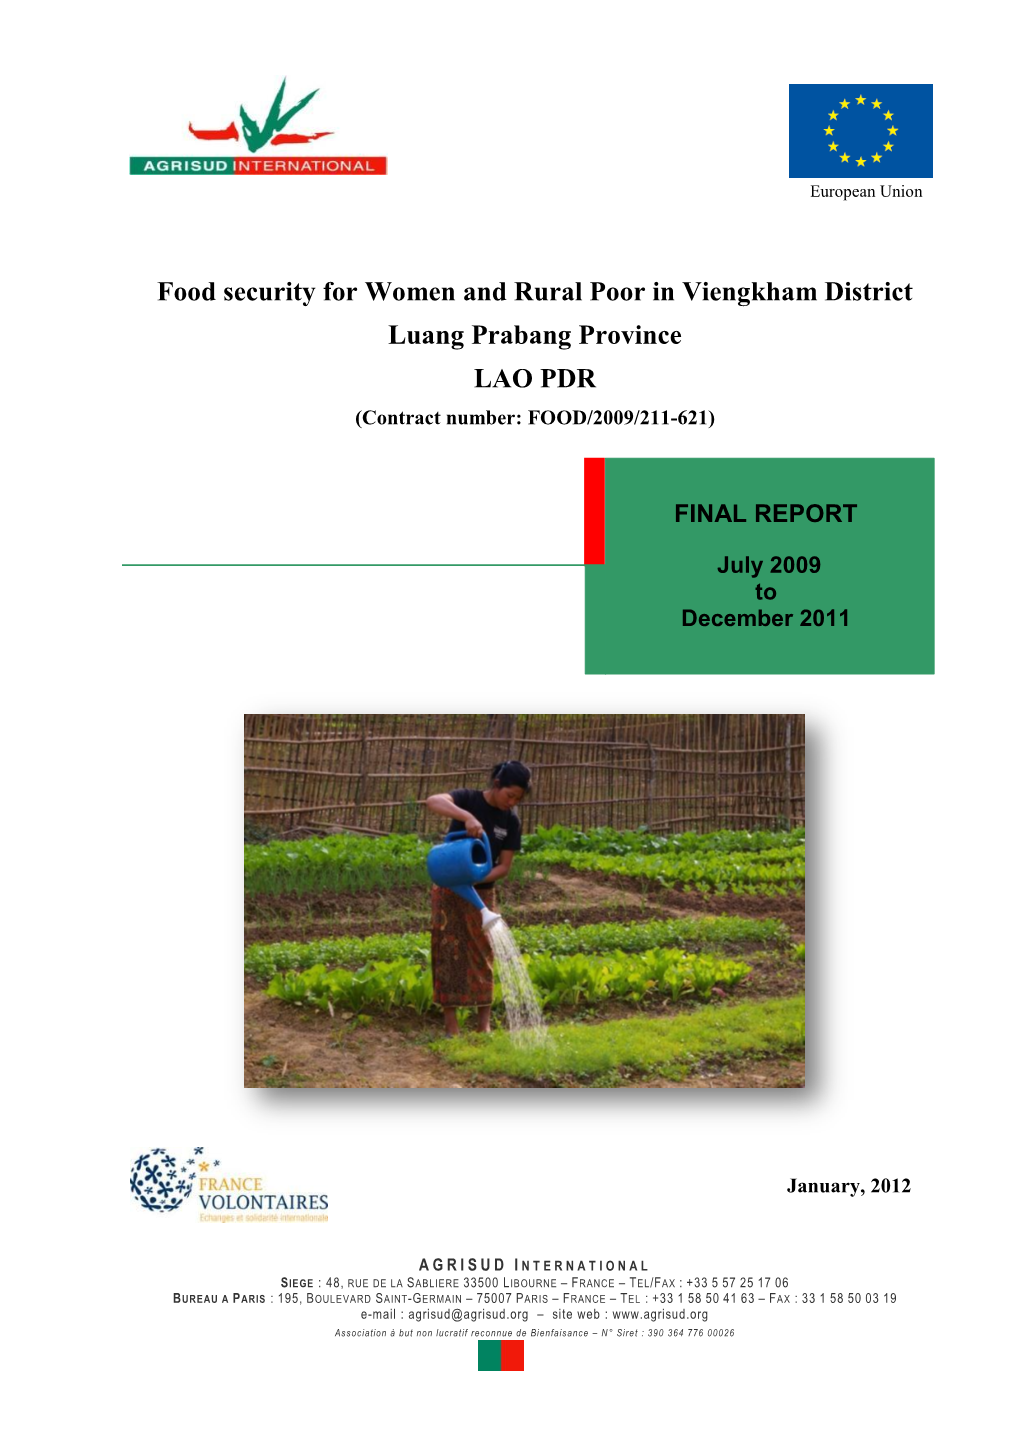 Food Security for Women and Rural Poor in Viengkham District Luang Prabang Province LAO PDR (Contract Number: FOOD/2009/211-621)